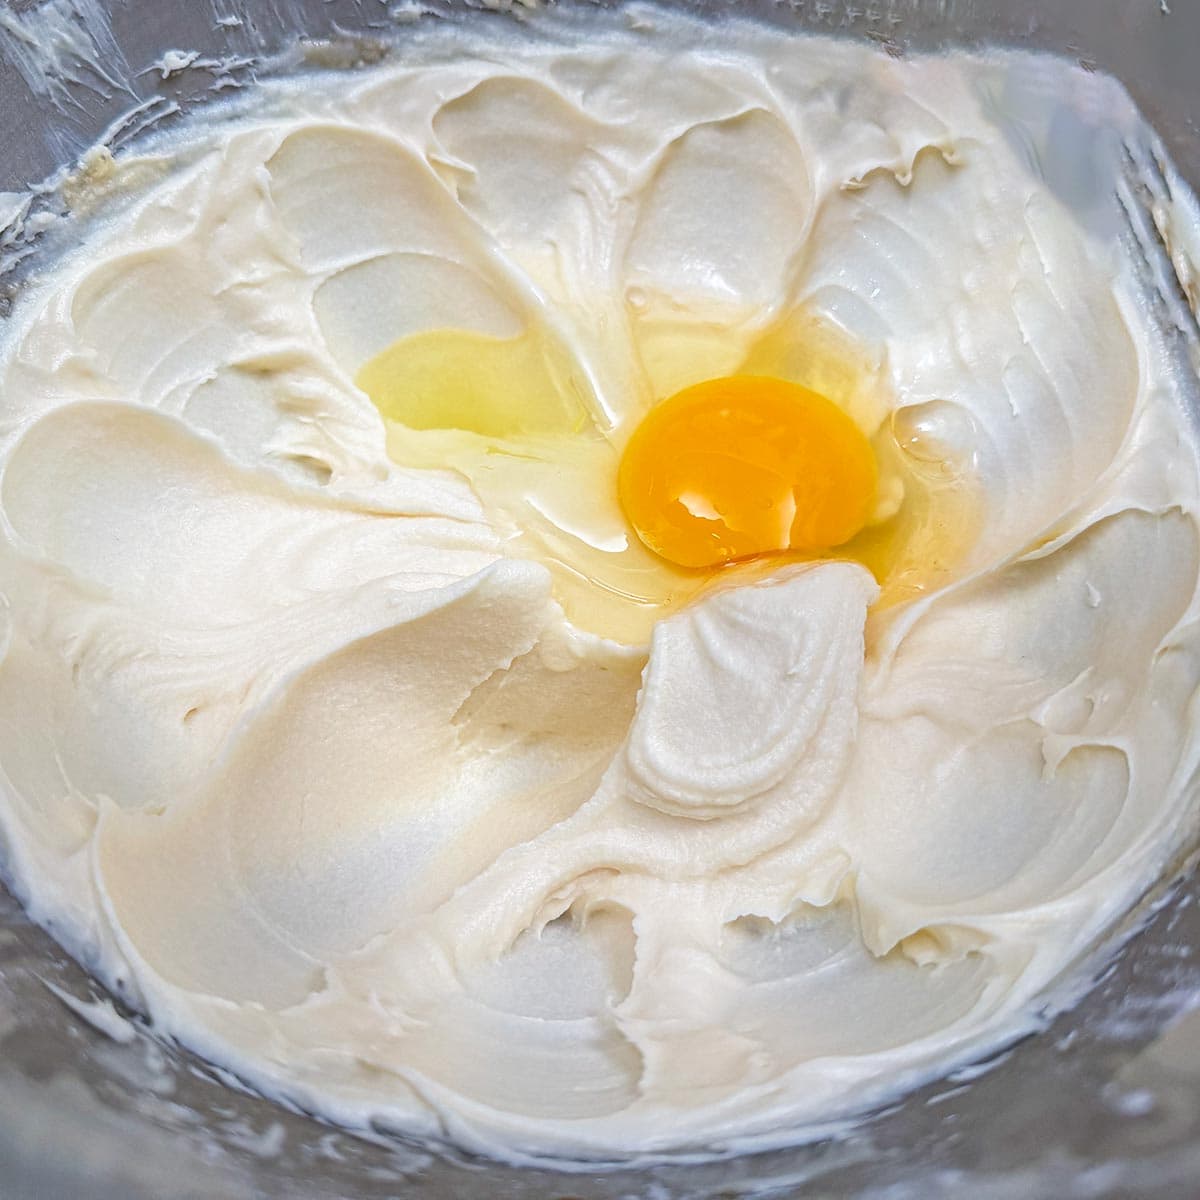 Now is the time to add the egg and the vanilla extract.